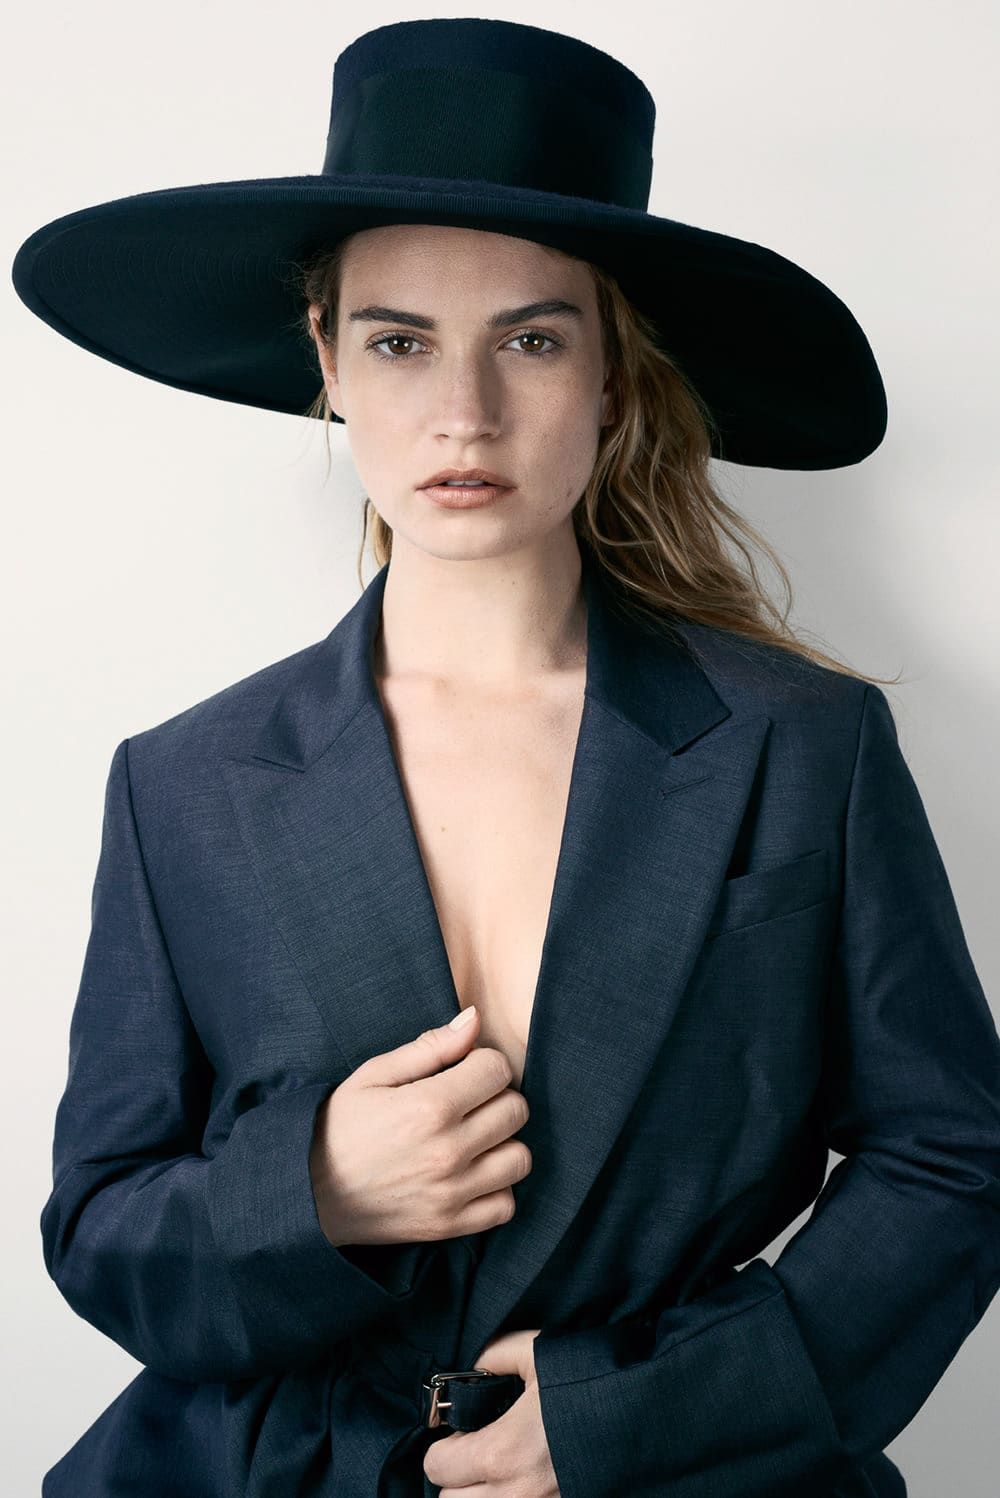 Lily James For Vanity Fair Italy Wallpapers